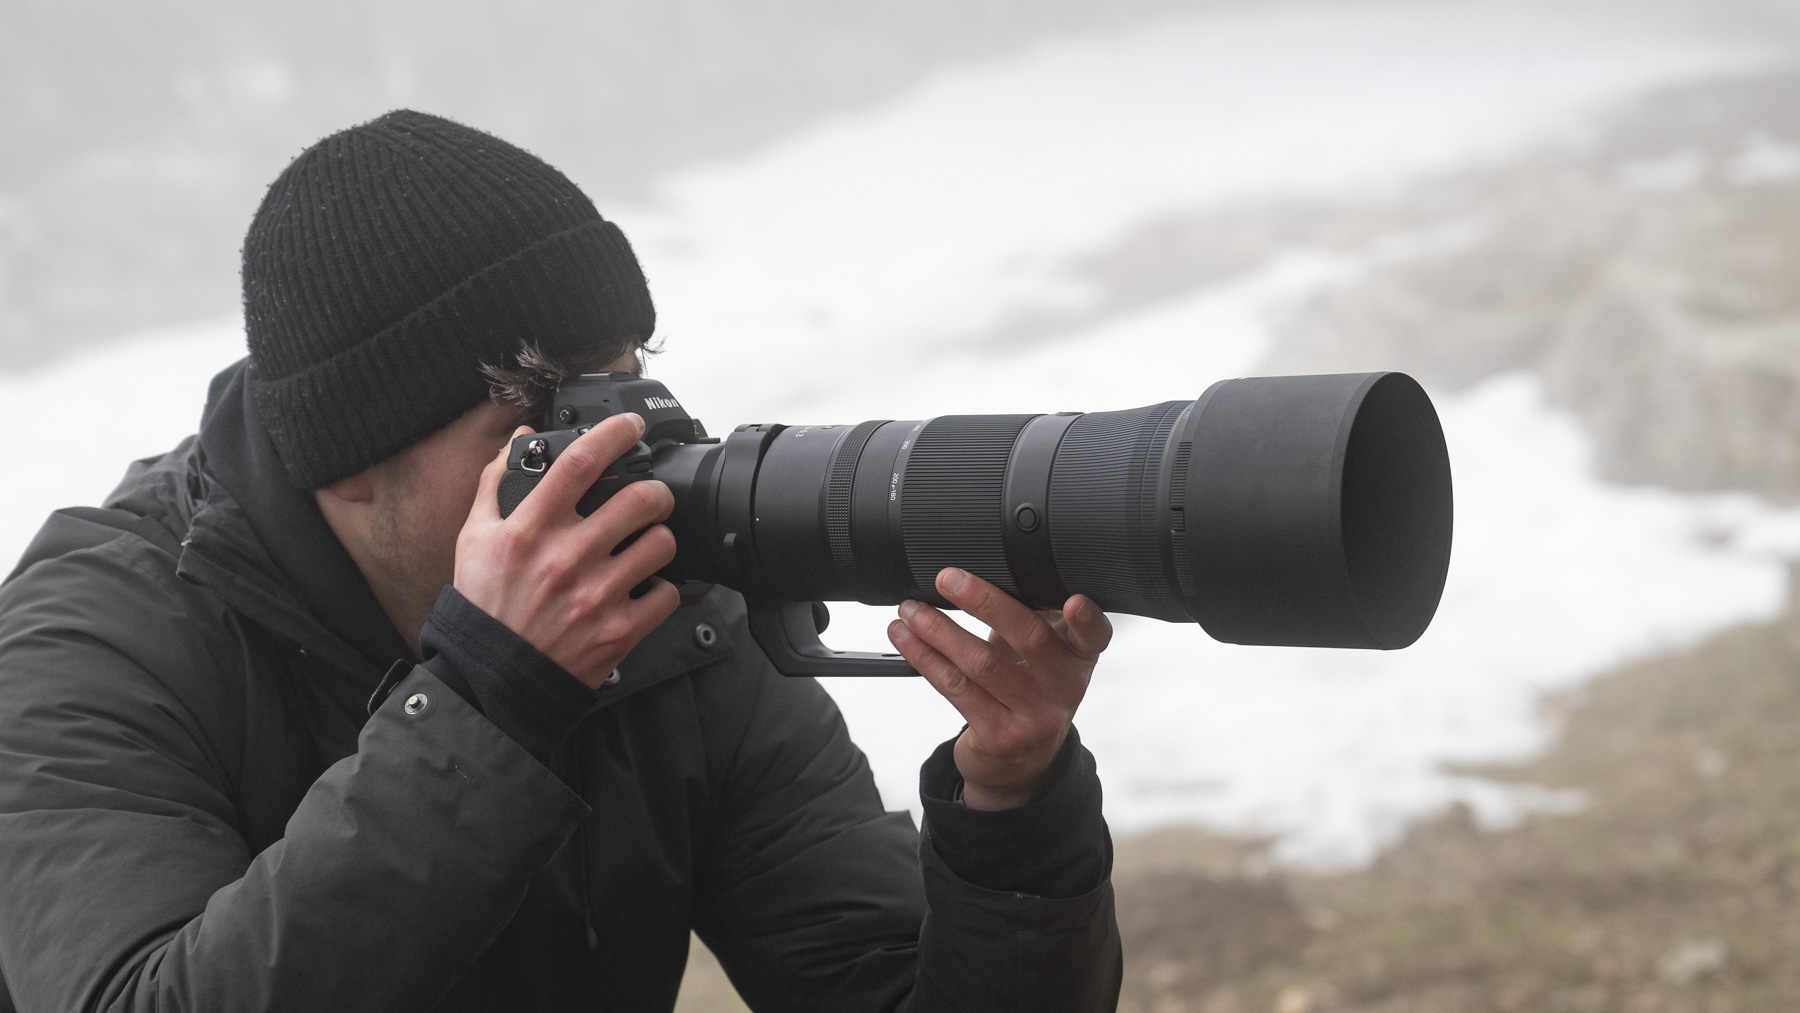 Photographer with the Nikkor Z 180-600mm lens in the hand outdoors wintry location